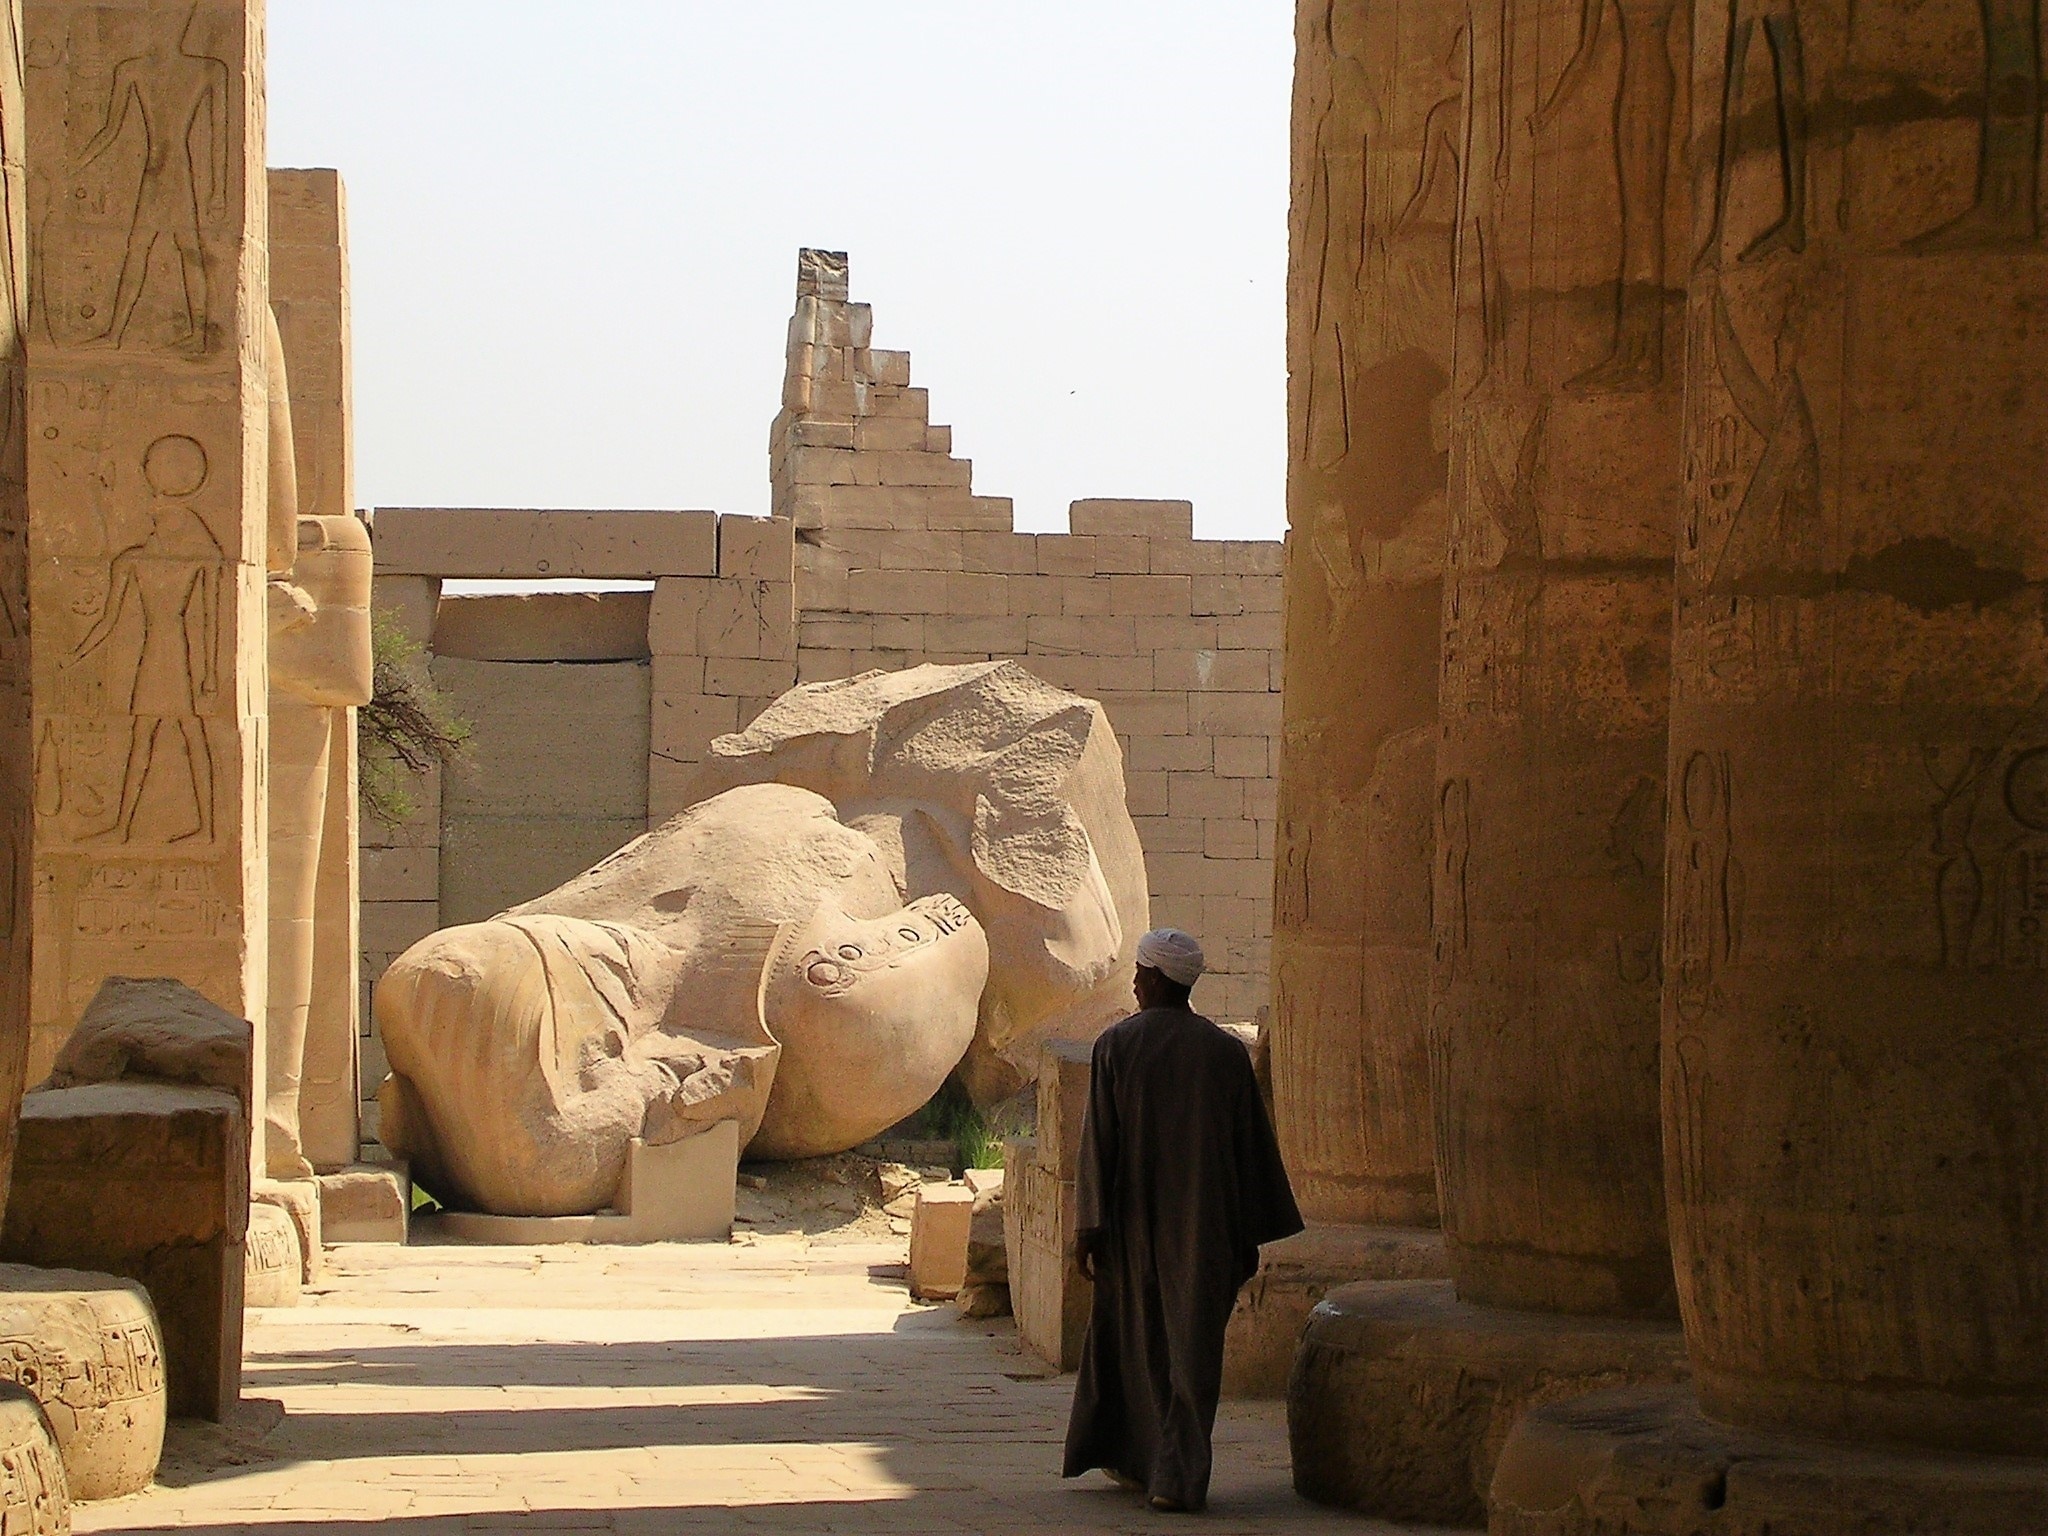 If you are in Luxor you have to visit this tempel 